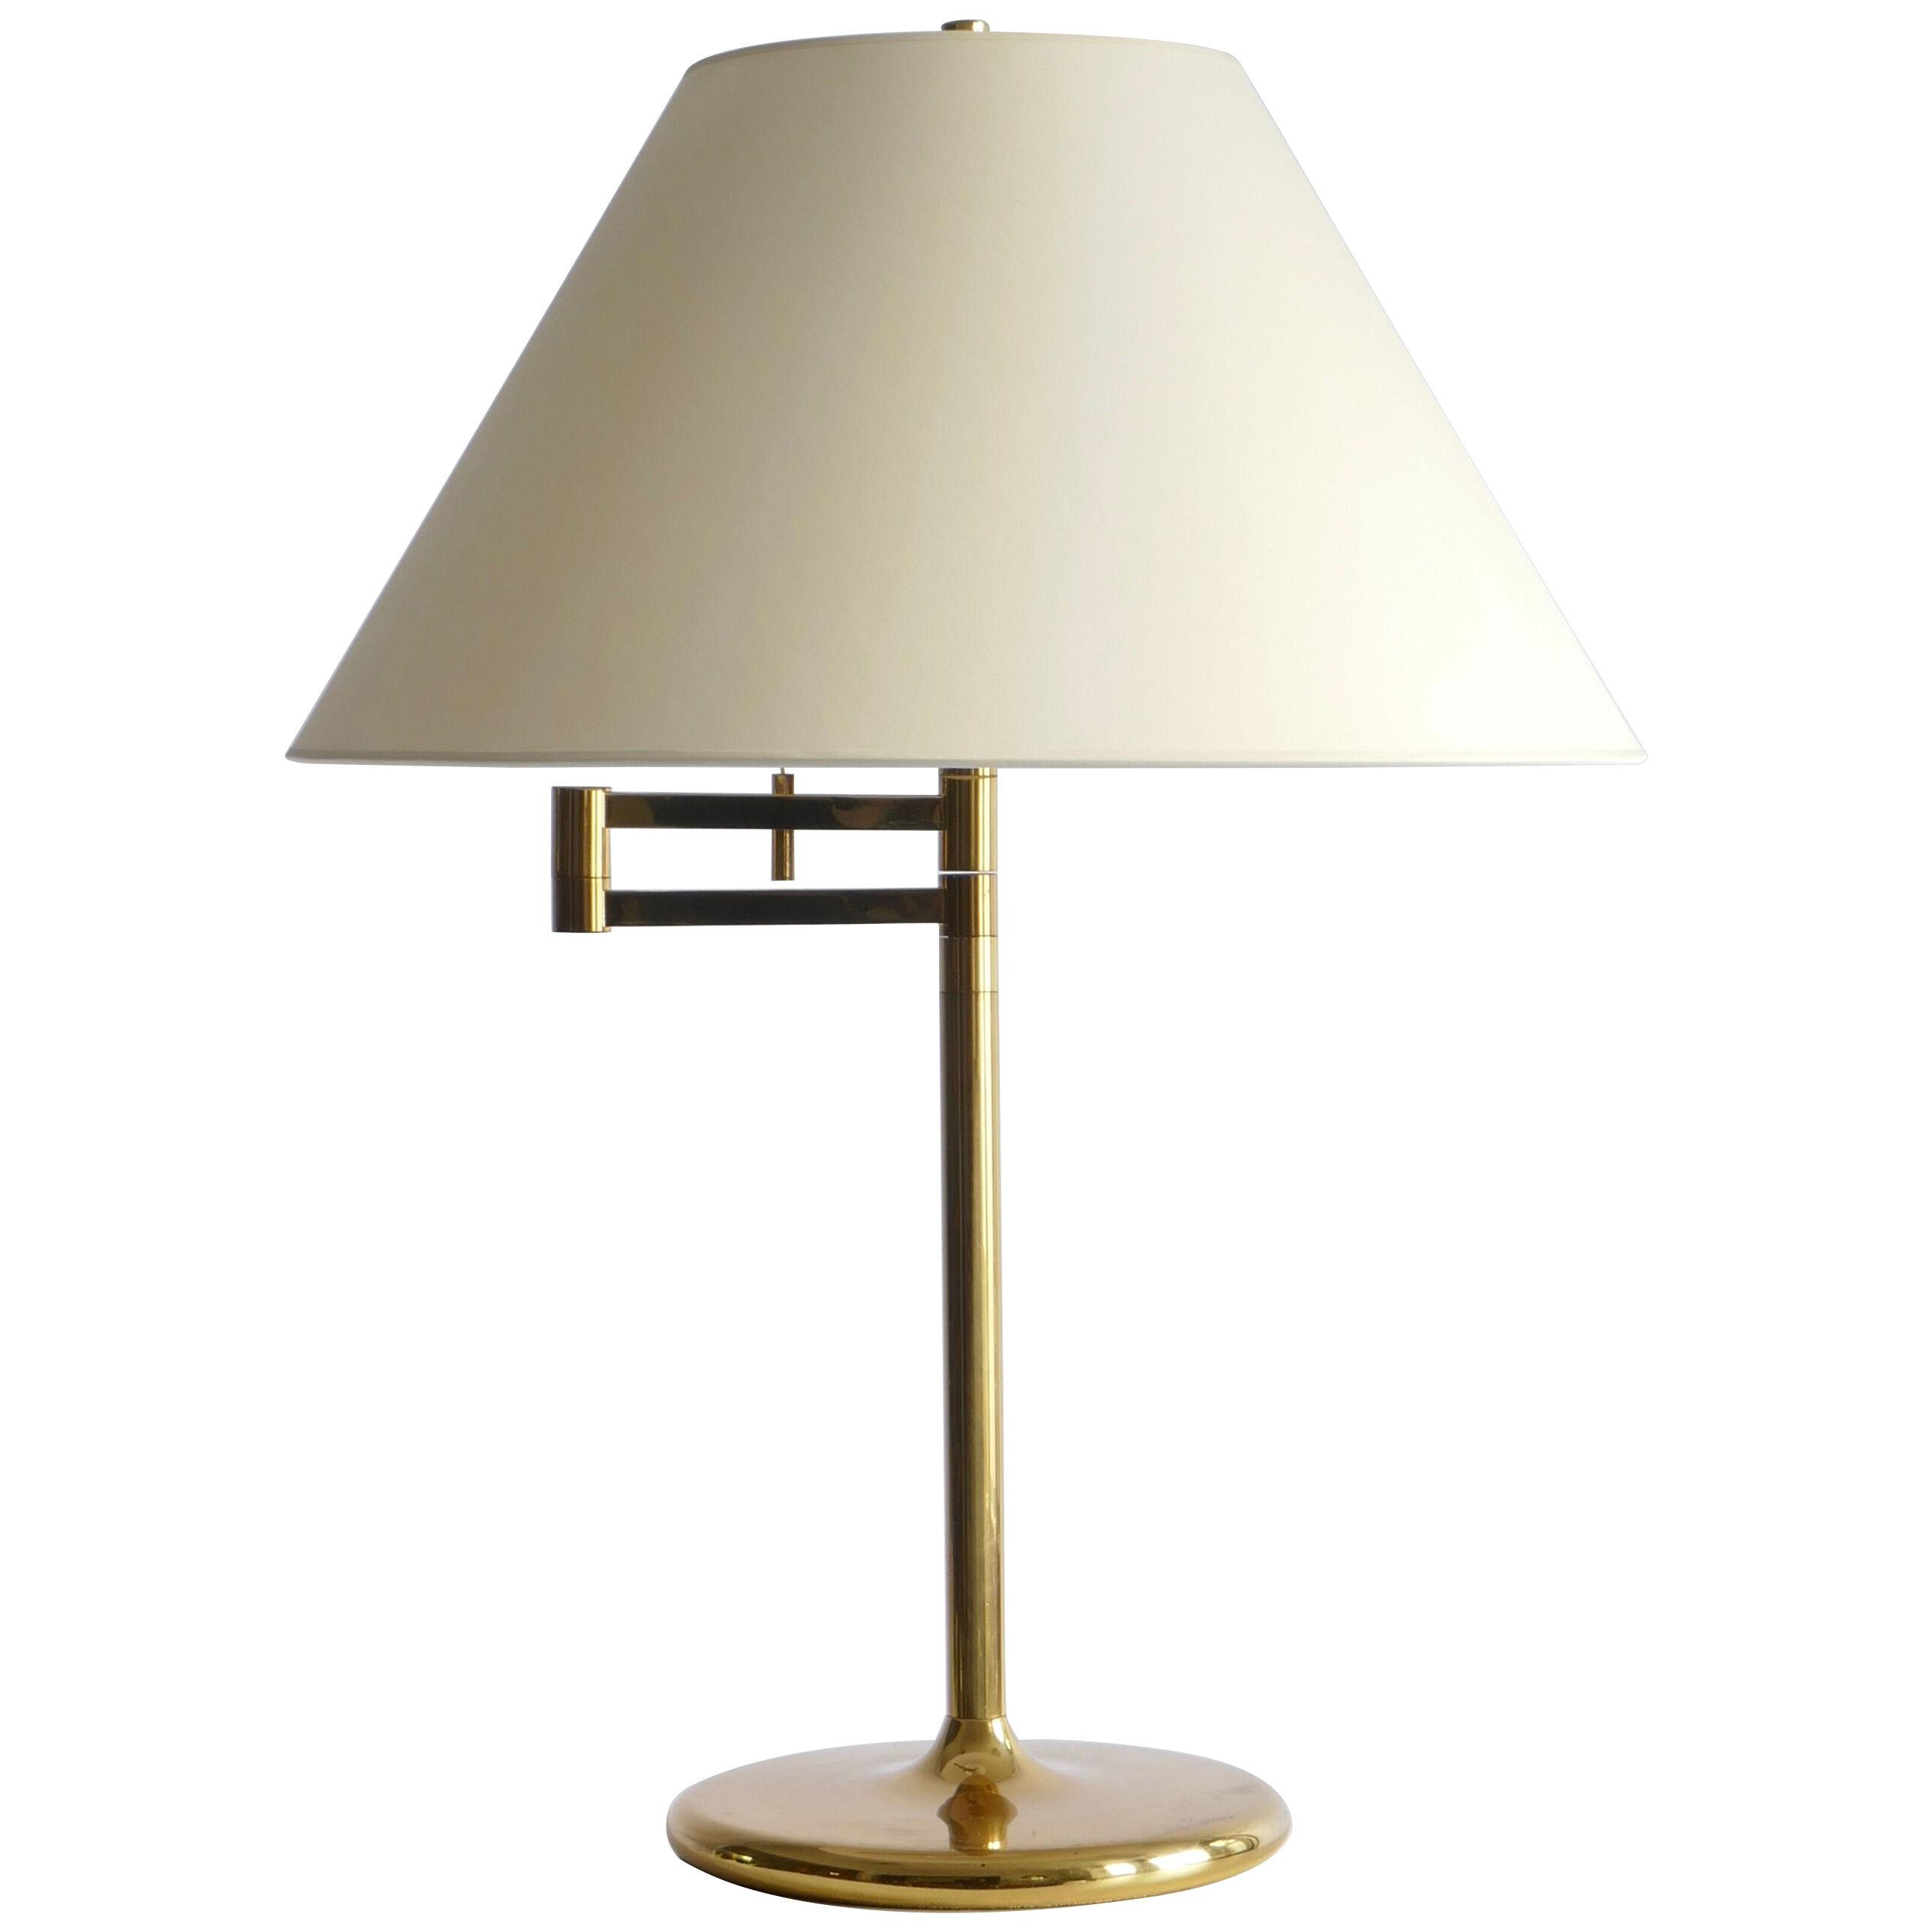 Brass Swing Arm Table Lamp, Germany, 1970s